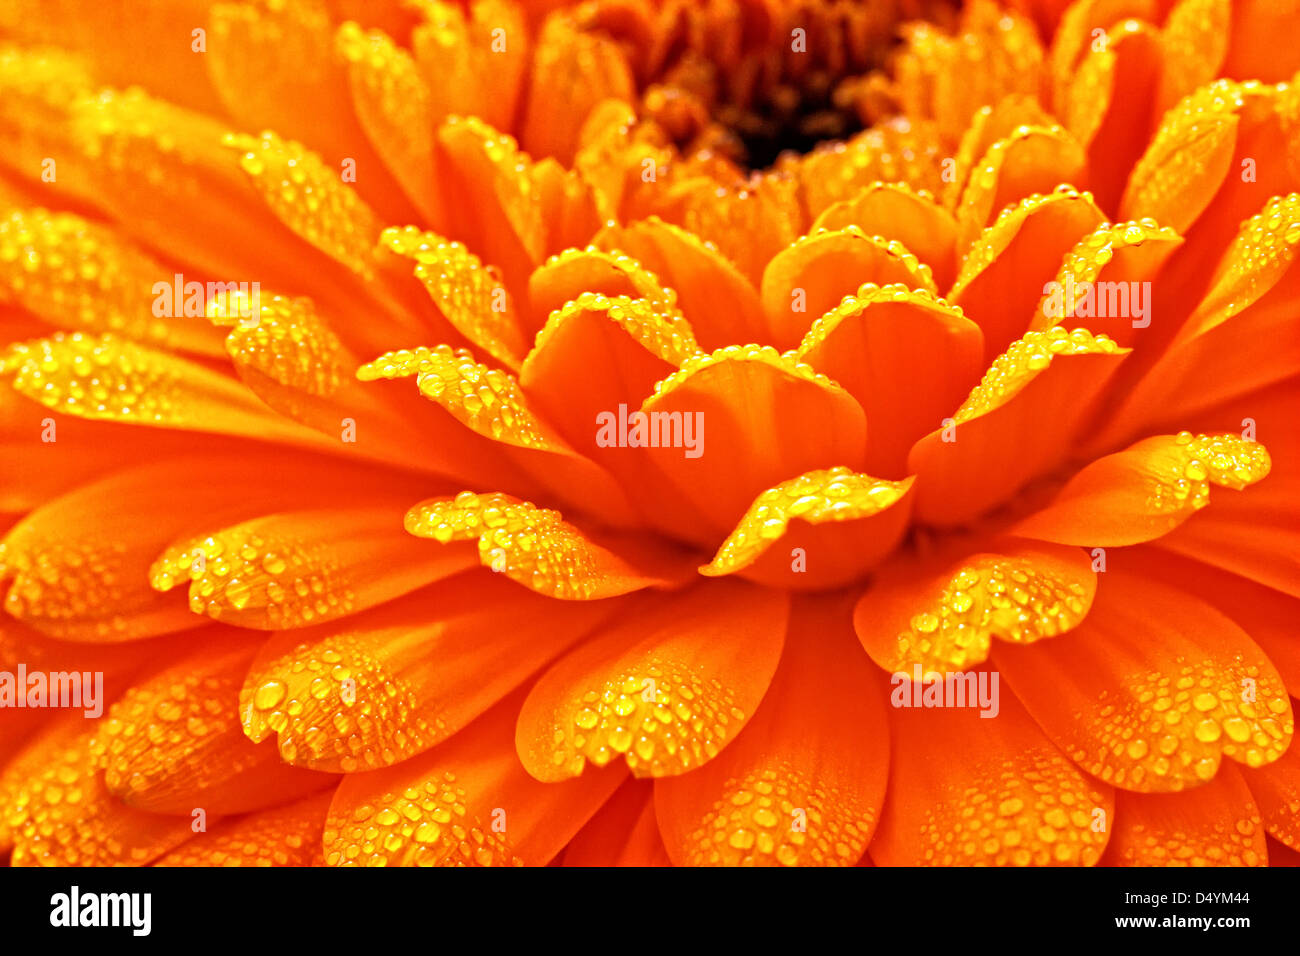 Calendula blossom, captured with morning dew, on the petals. Stock Photo